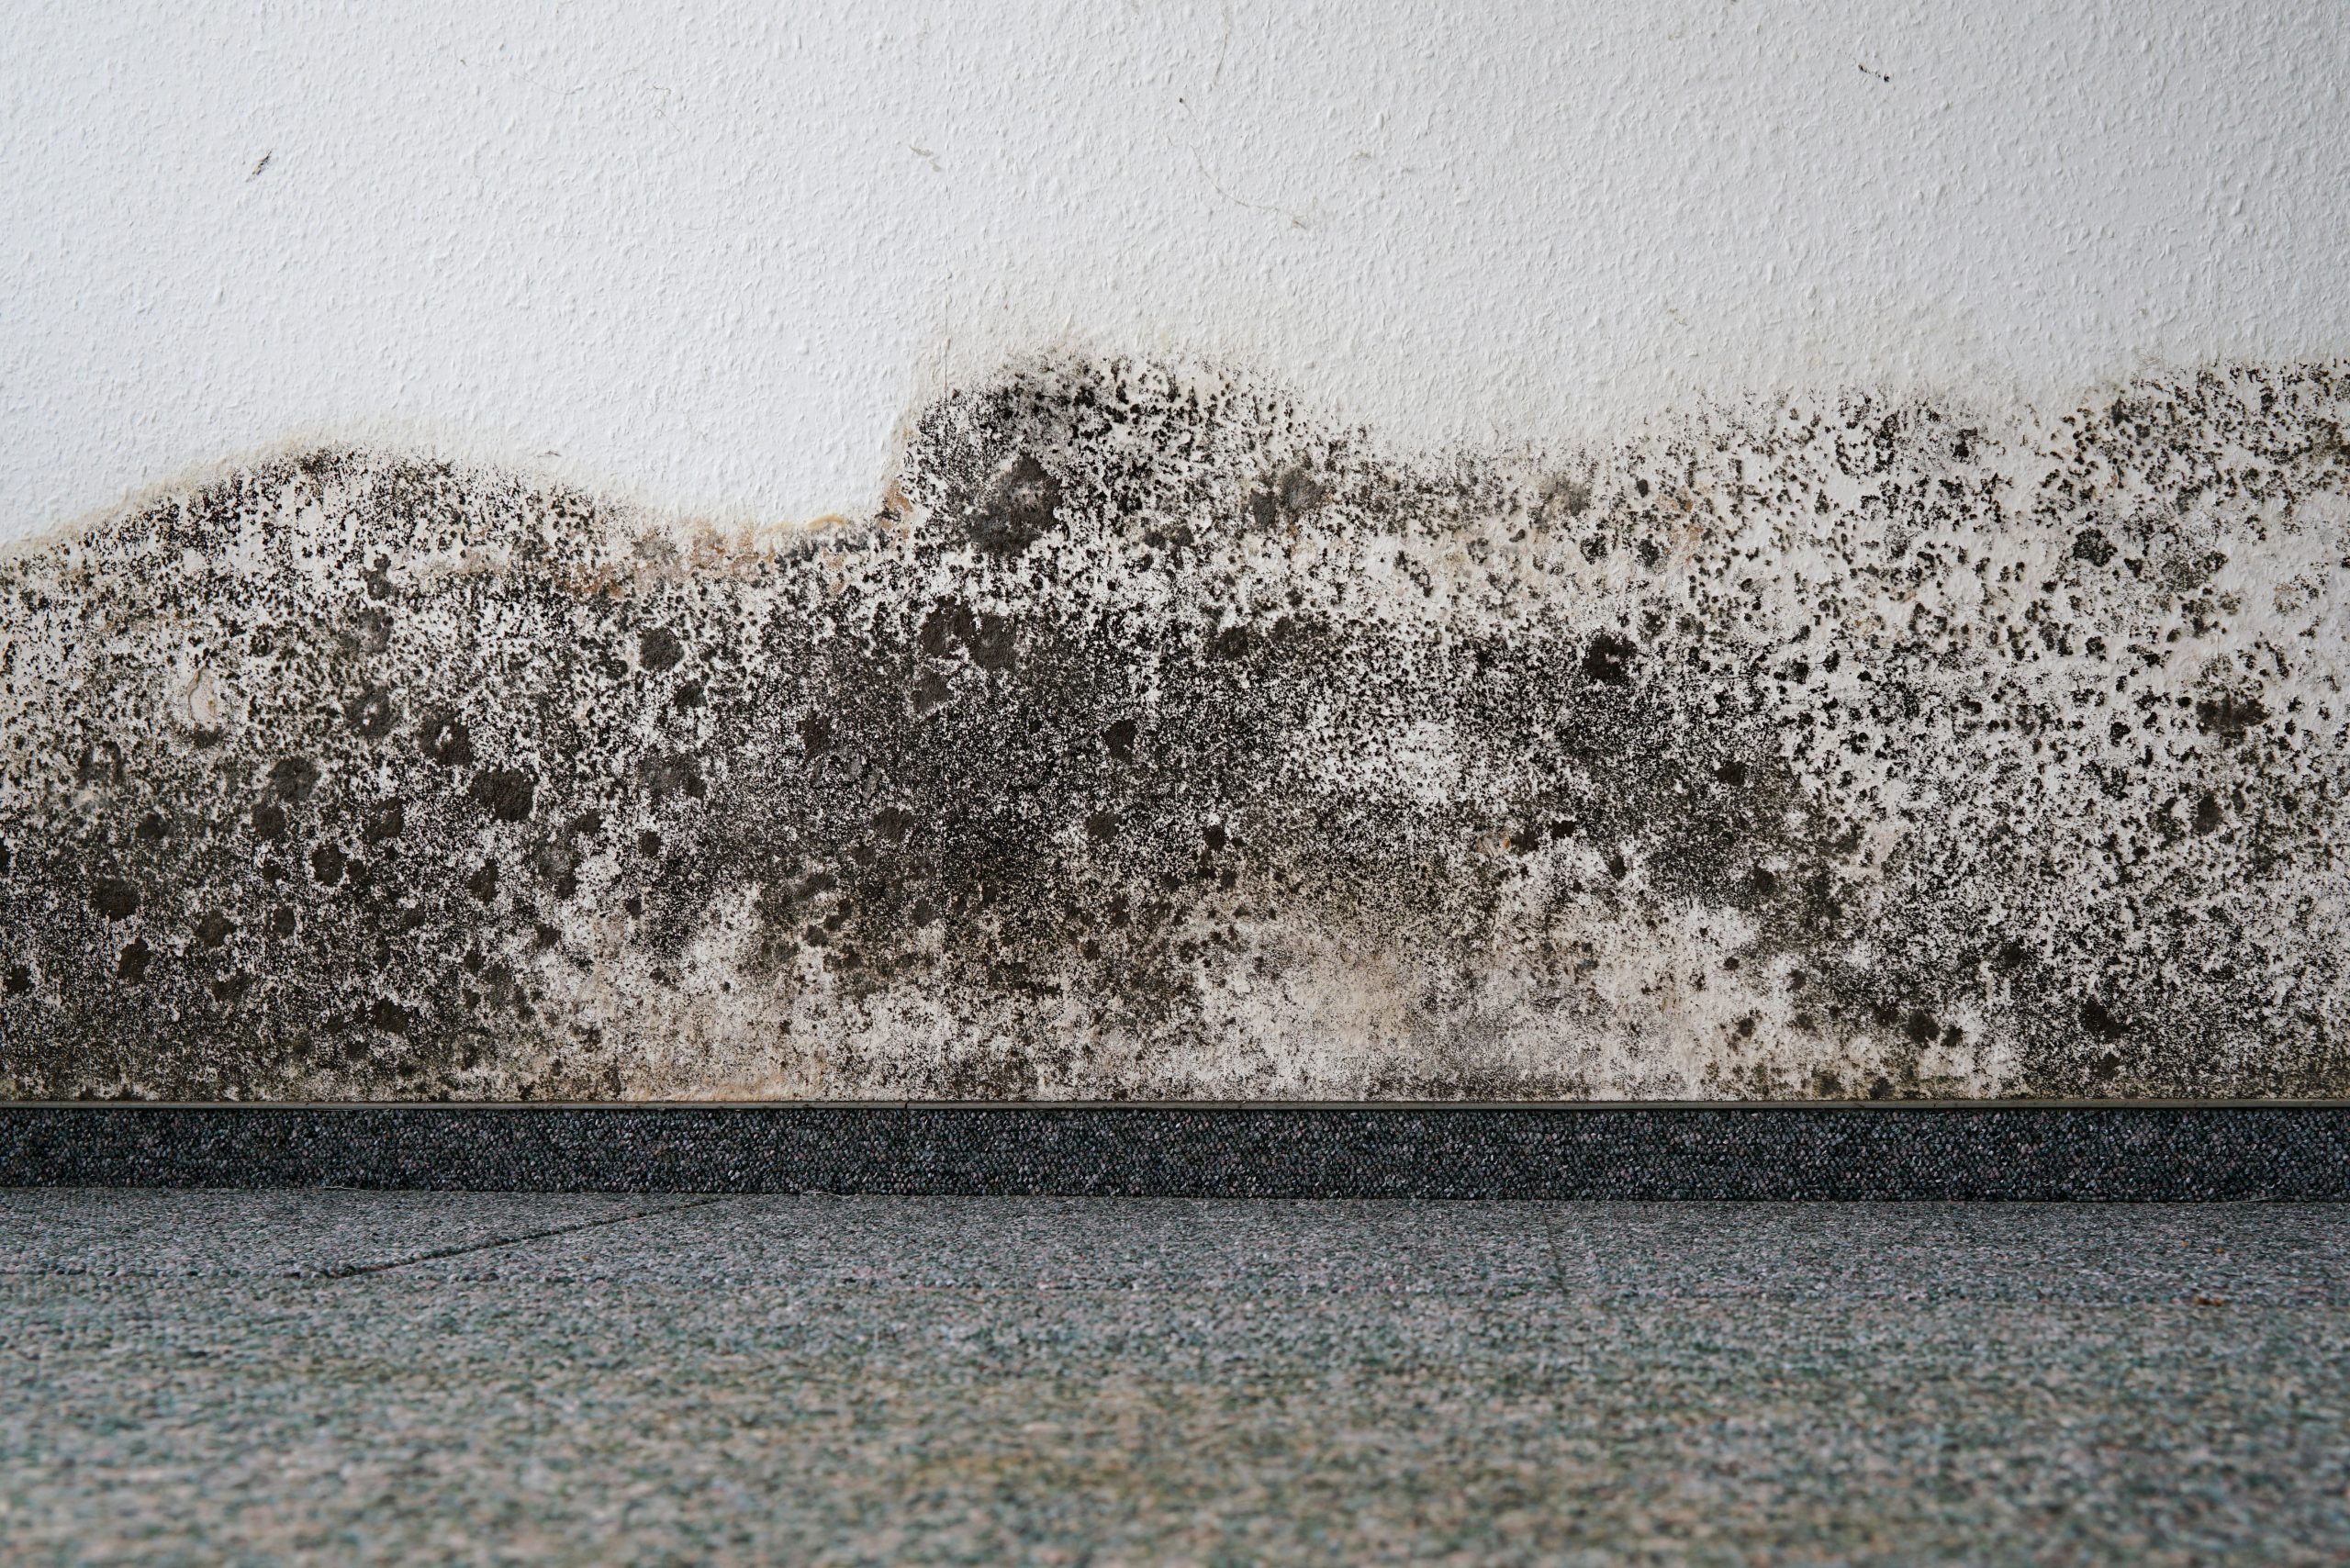 Black mold on a white wall in the house.